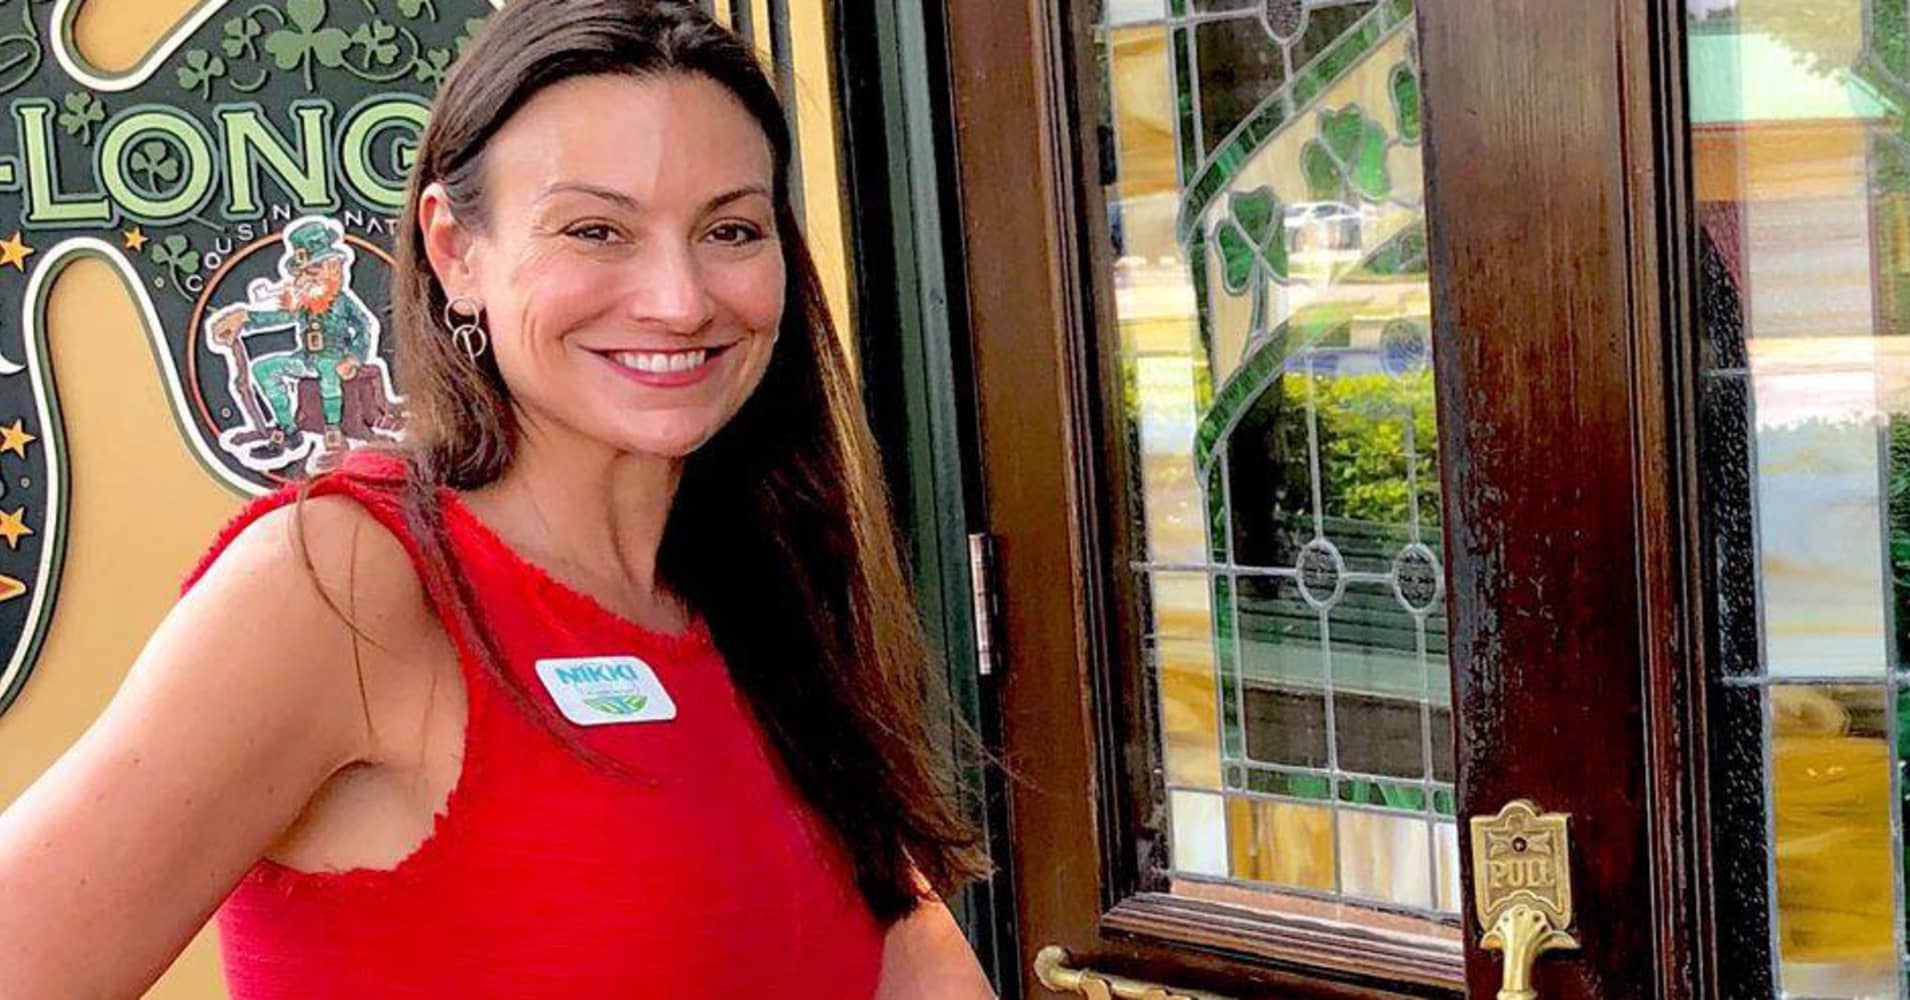 Nikki Fried, a Democrat running for agriculture commissioner in Florida